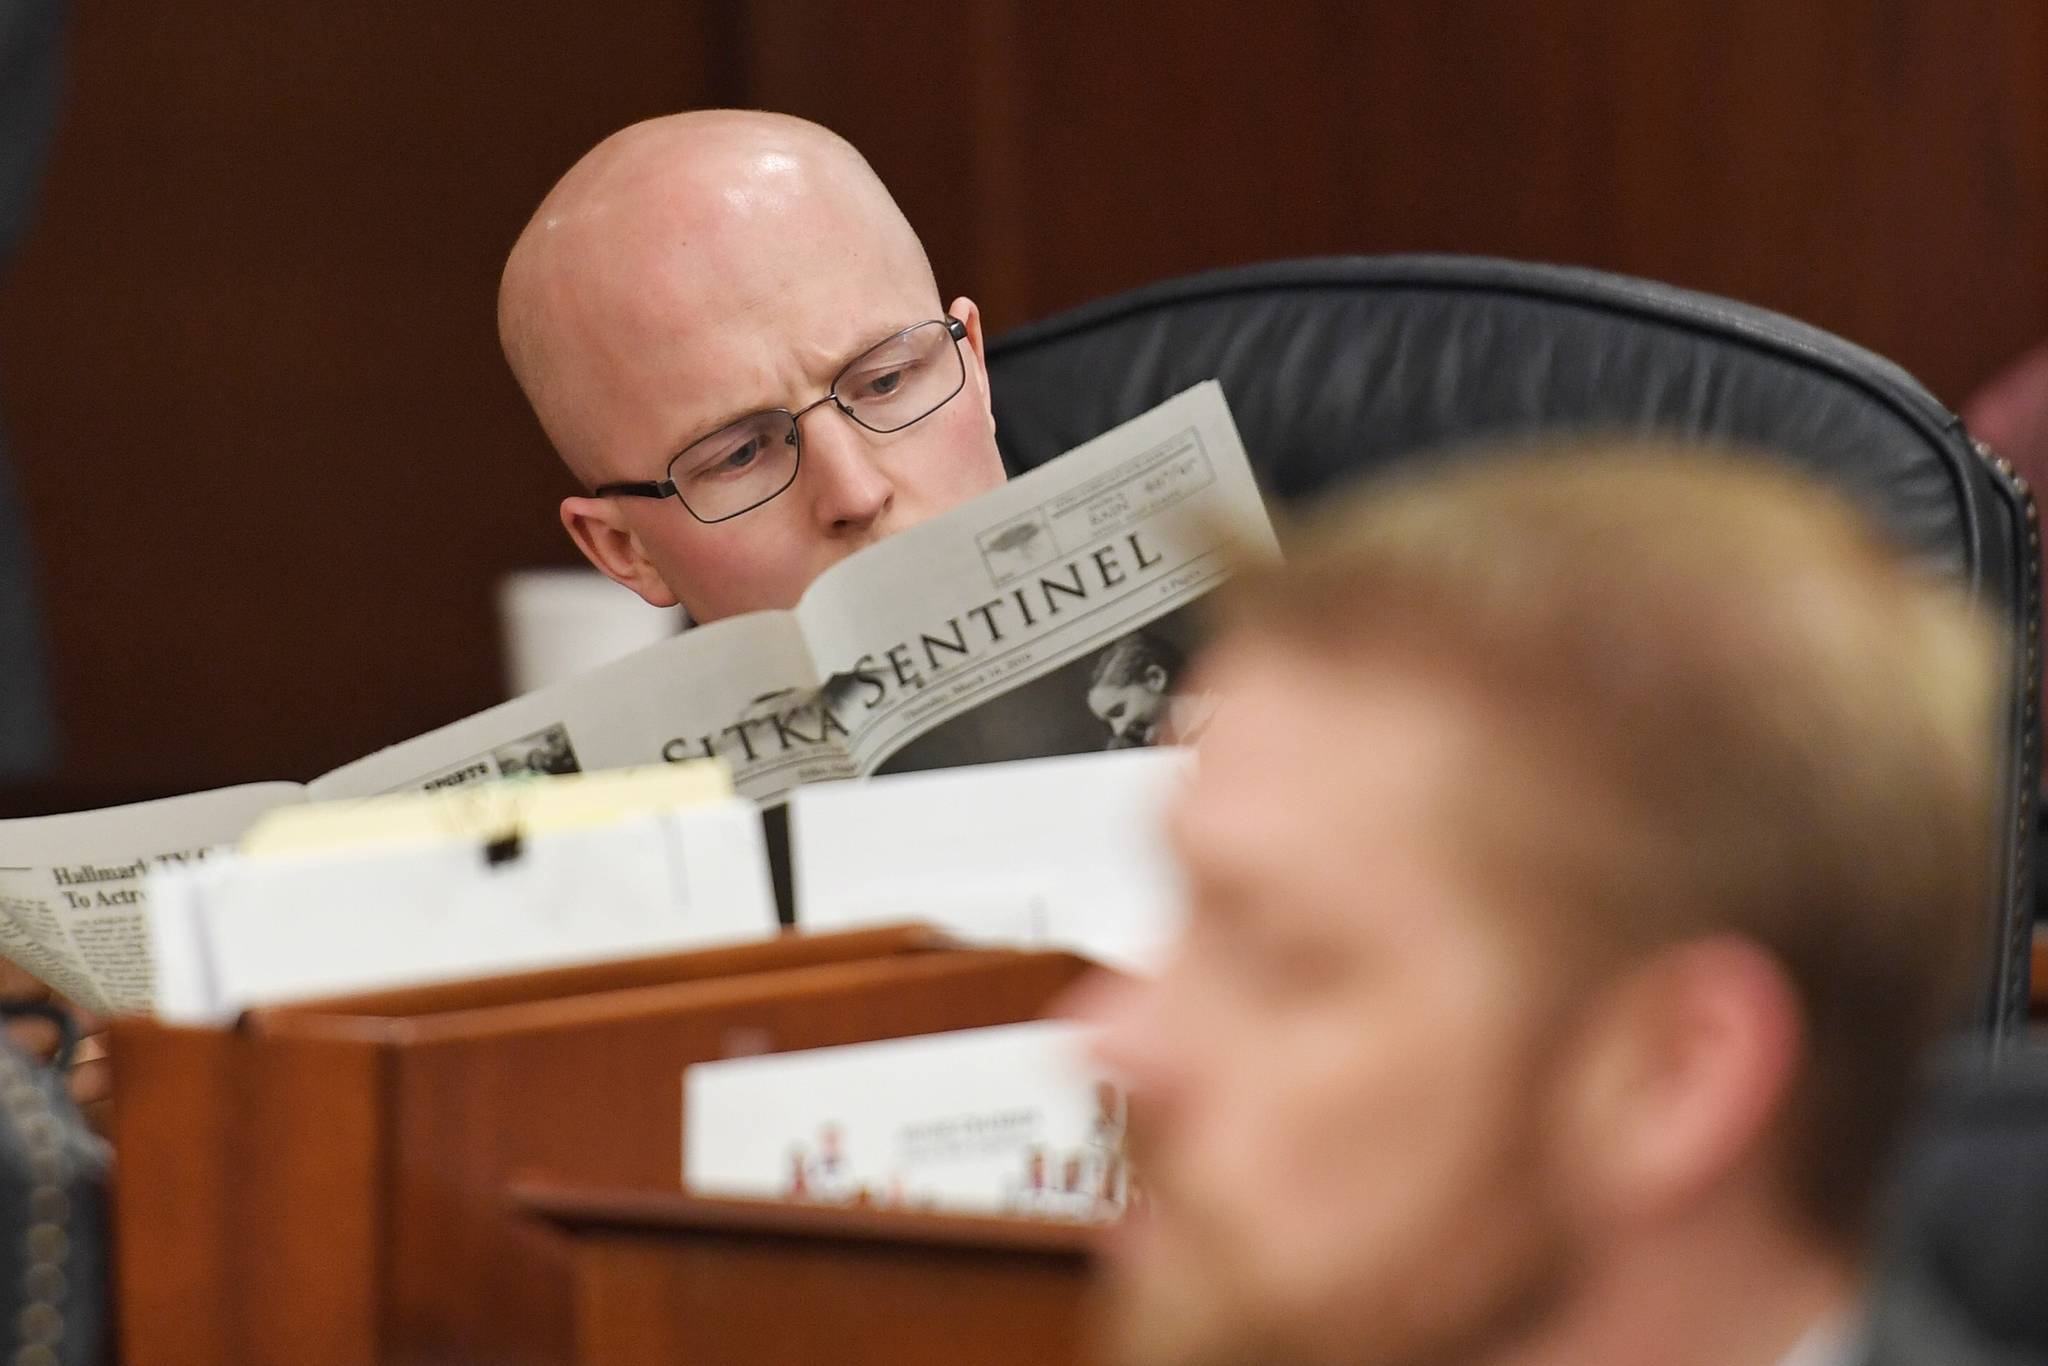 Rep. Jonathan Kreiss-Tomkins, D-Sitka, catches up on his hometown news as the House works on last minute bills on Wednesday, May 15, 2019. (Michael Penn | Juneau Empire)